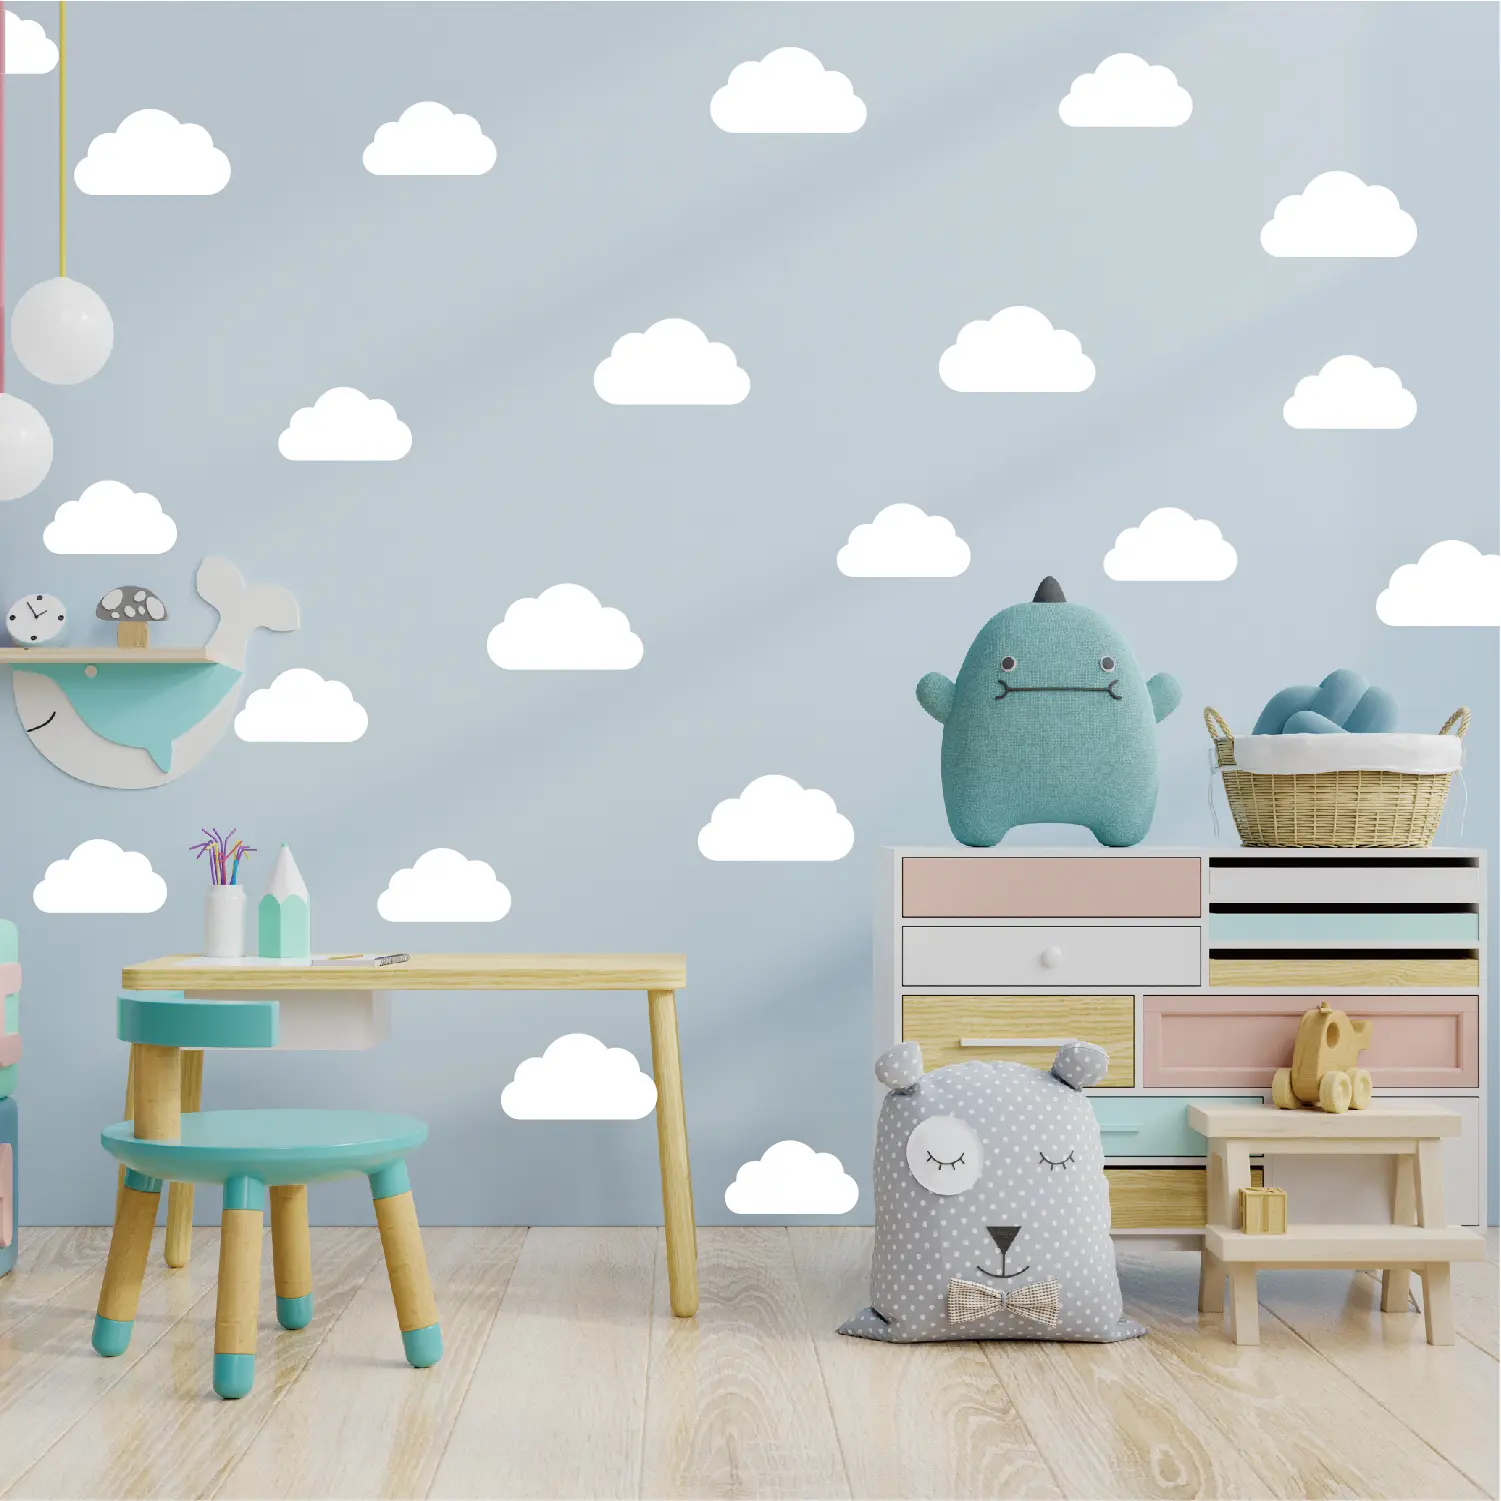 White Clouds Removable Vinyl Wall sticker Decals DIY Wall Sticker Art Wallpaper Stickers for Nursery bedroom kids Living Room